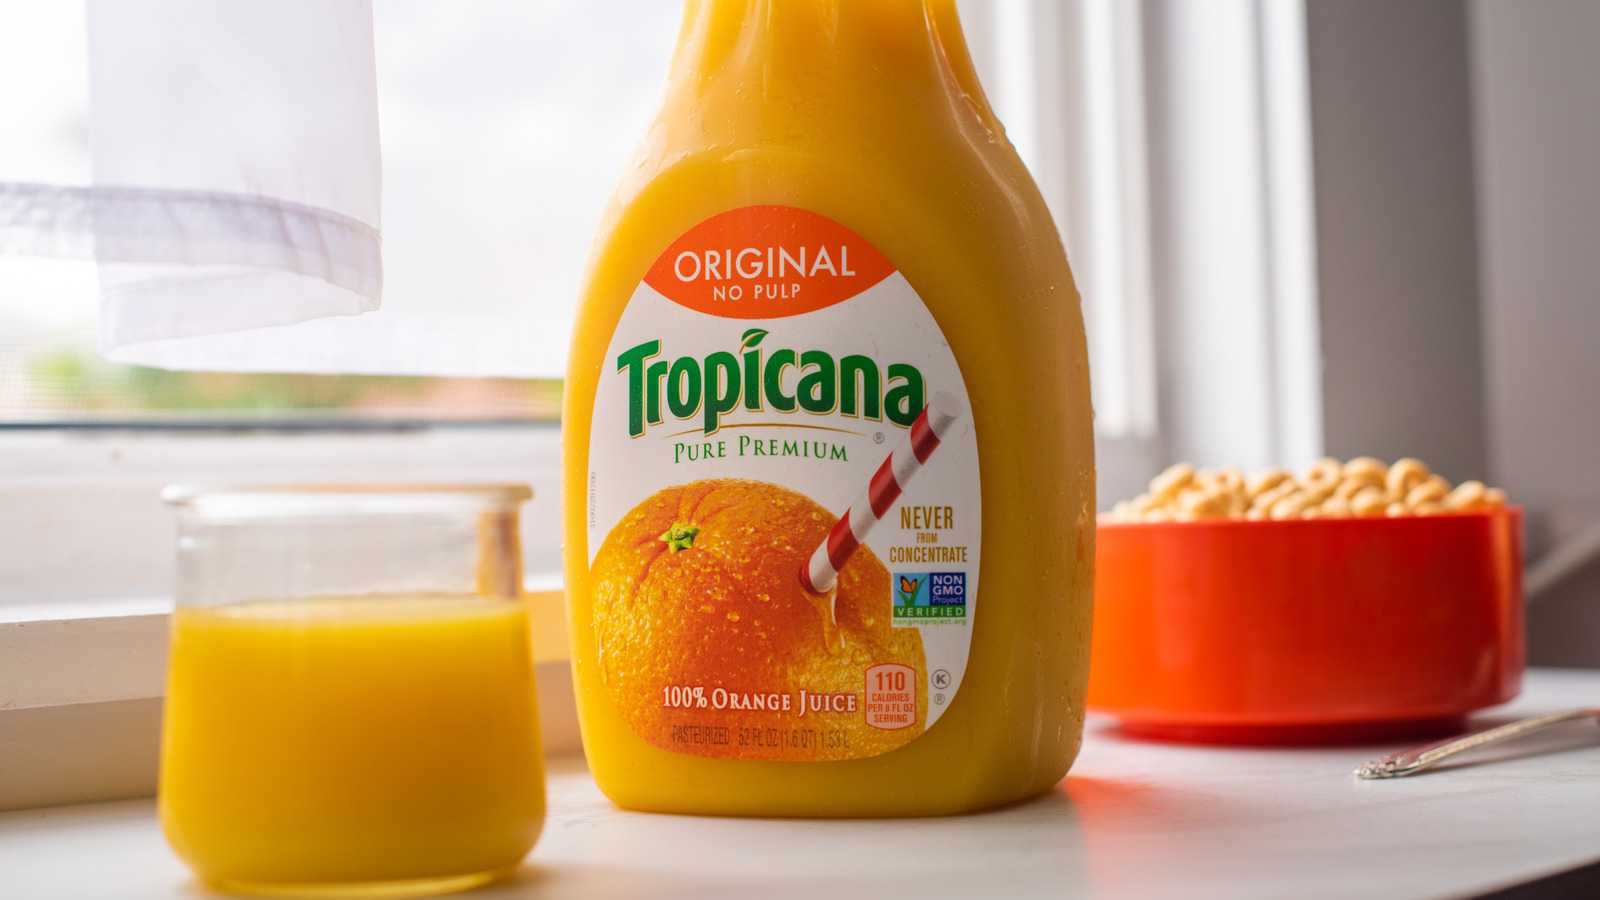 Hard to notice, but Tropicana shrank the size of its orange juice containers